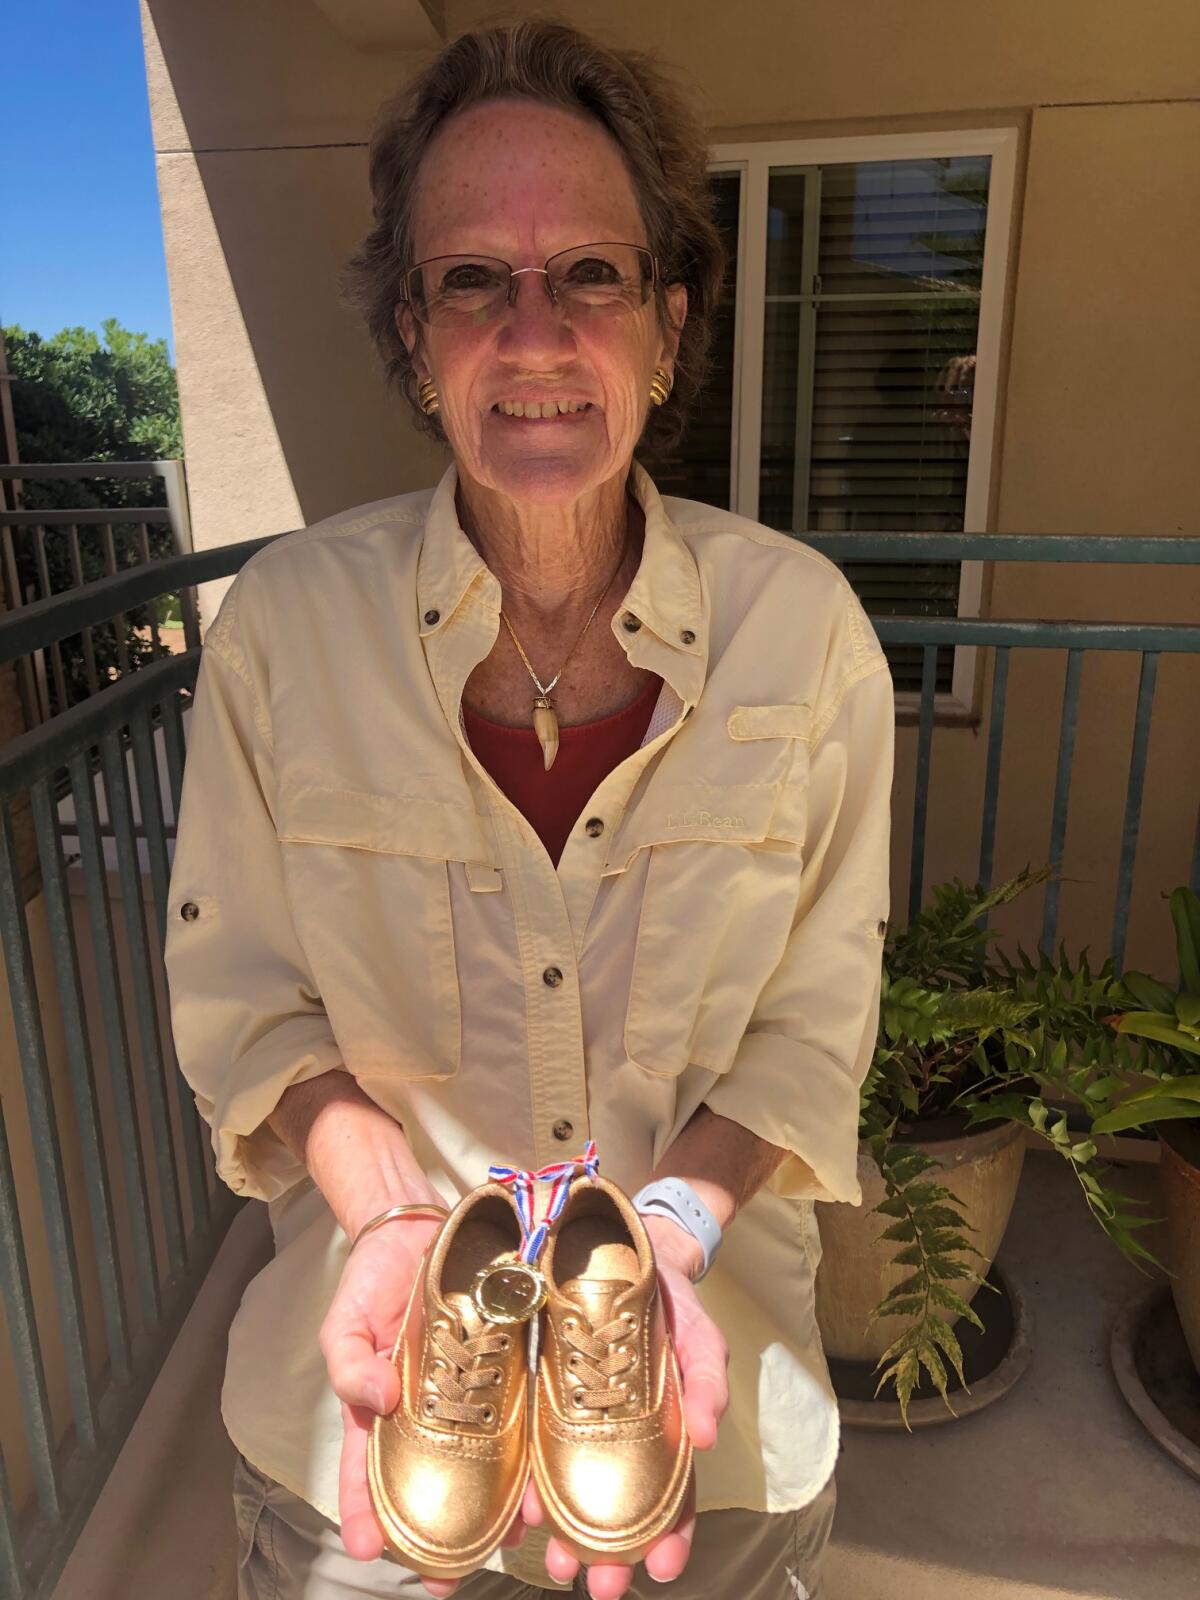 White Sands resident Anita Holmes shows the gold sneakers she received after winning the community's walking challenge.